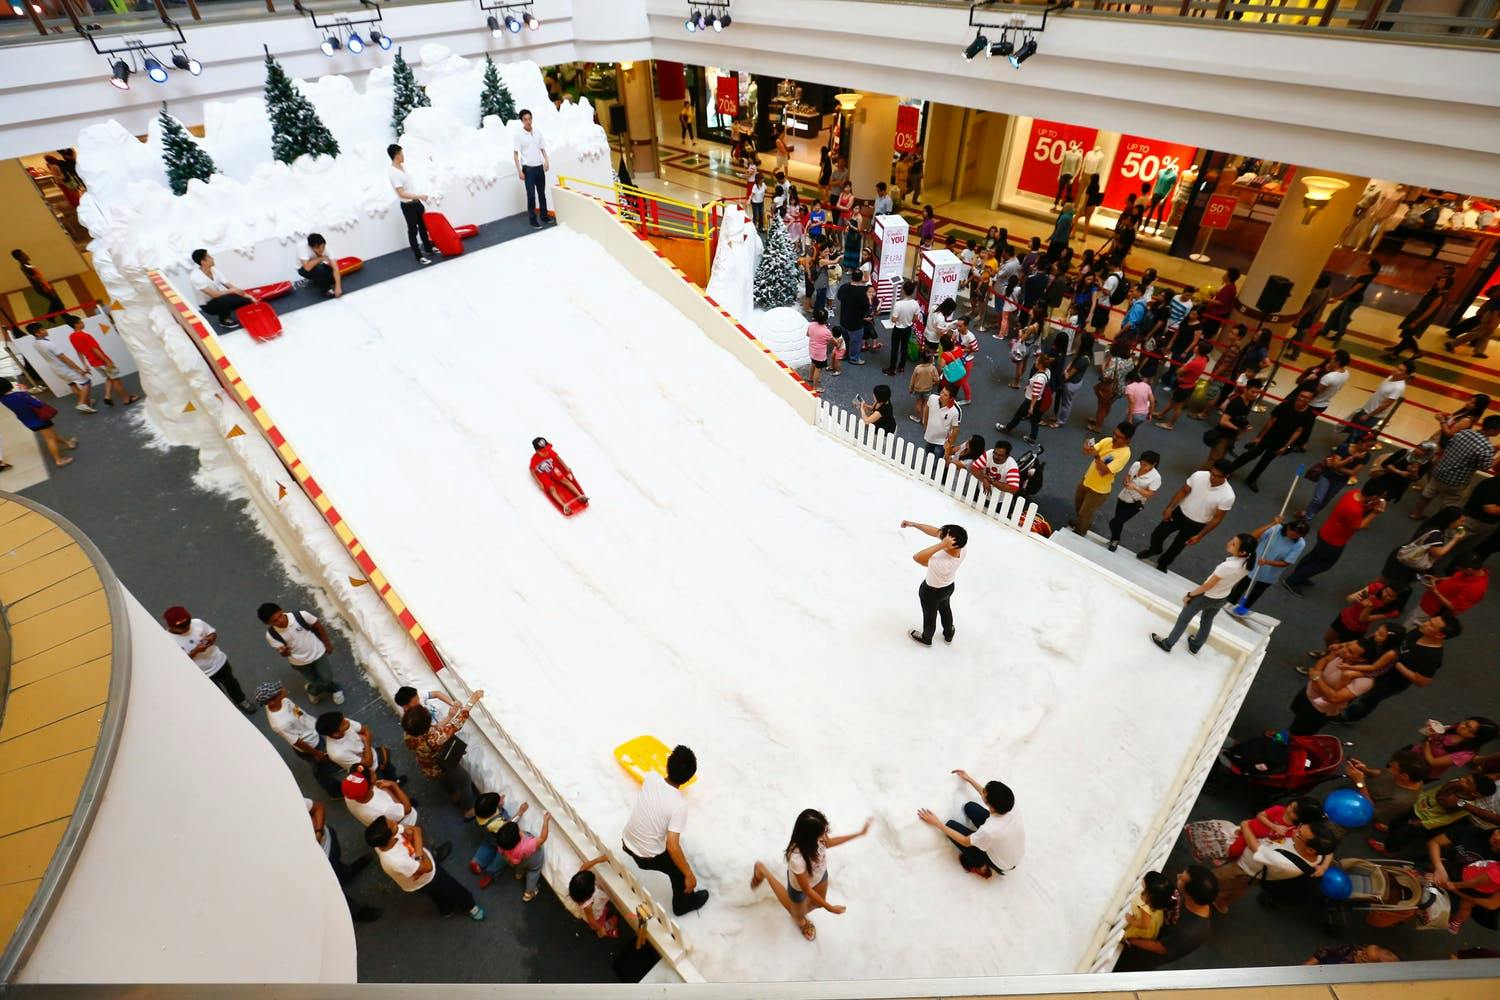 McDonalds launch in Kuala Lumpur with indoor sledding hill | PartySlate